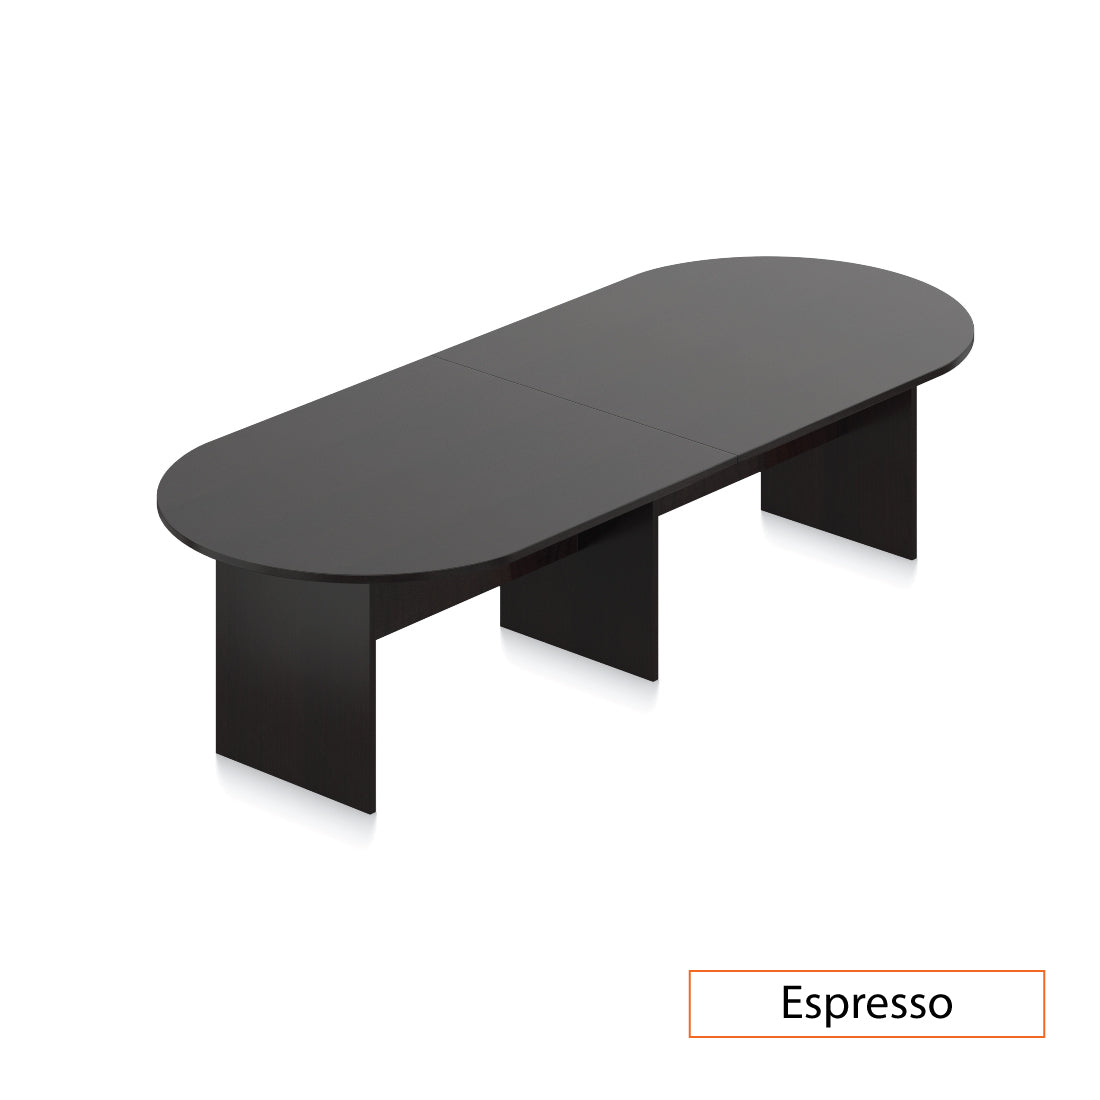 10 ft. Racetrack Conference Table (120" x 48") - Kainosbuy.com